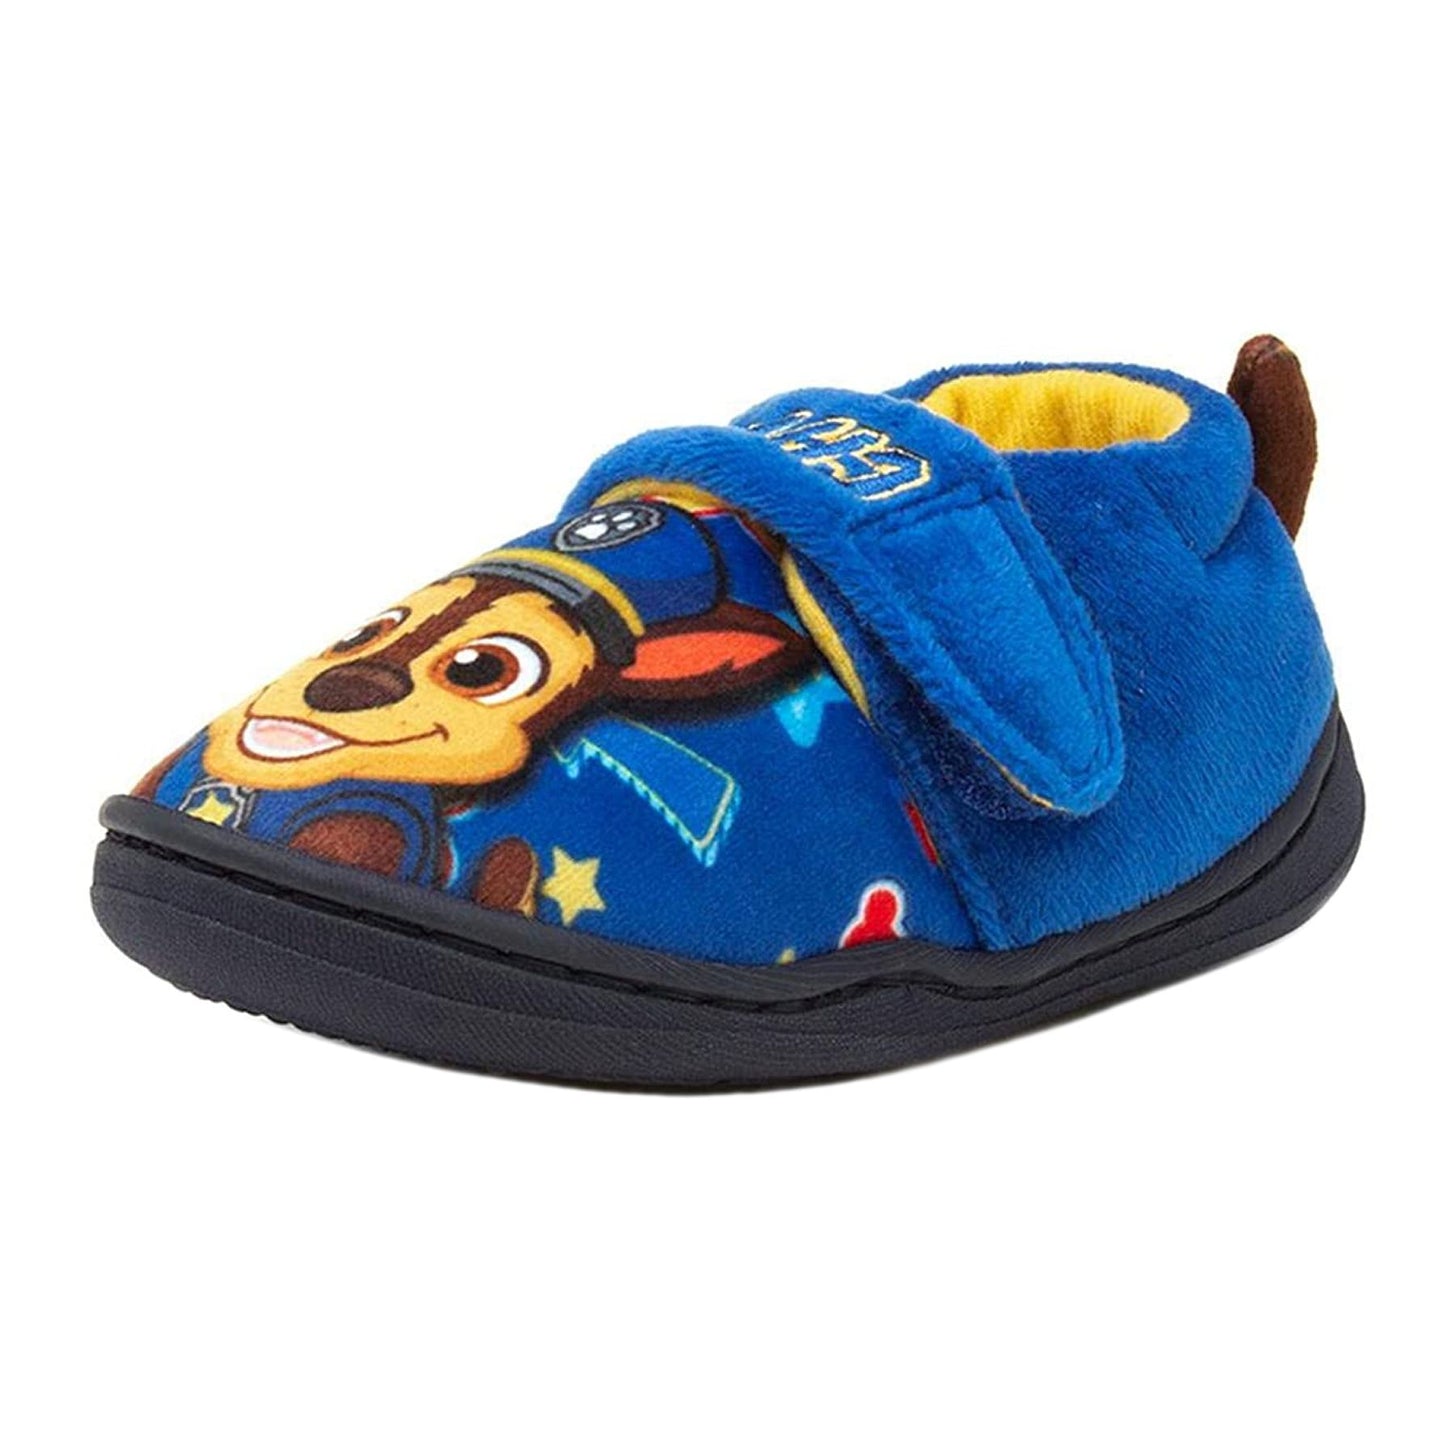 Childrens Paw Patrol Chase Slippers